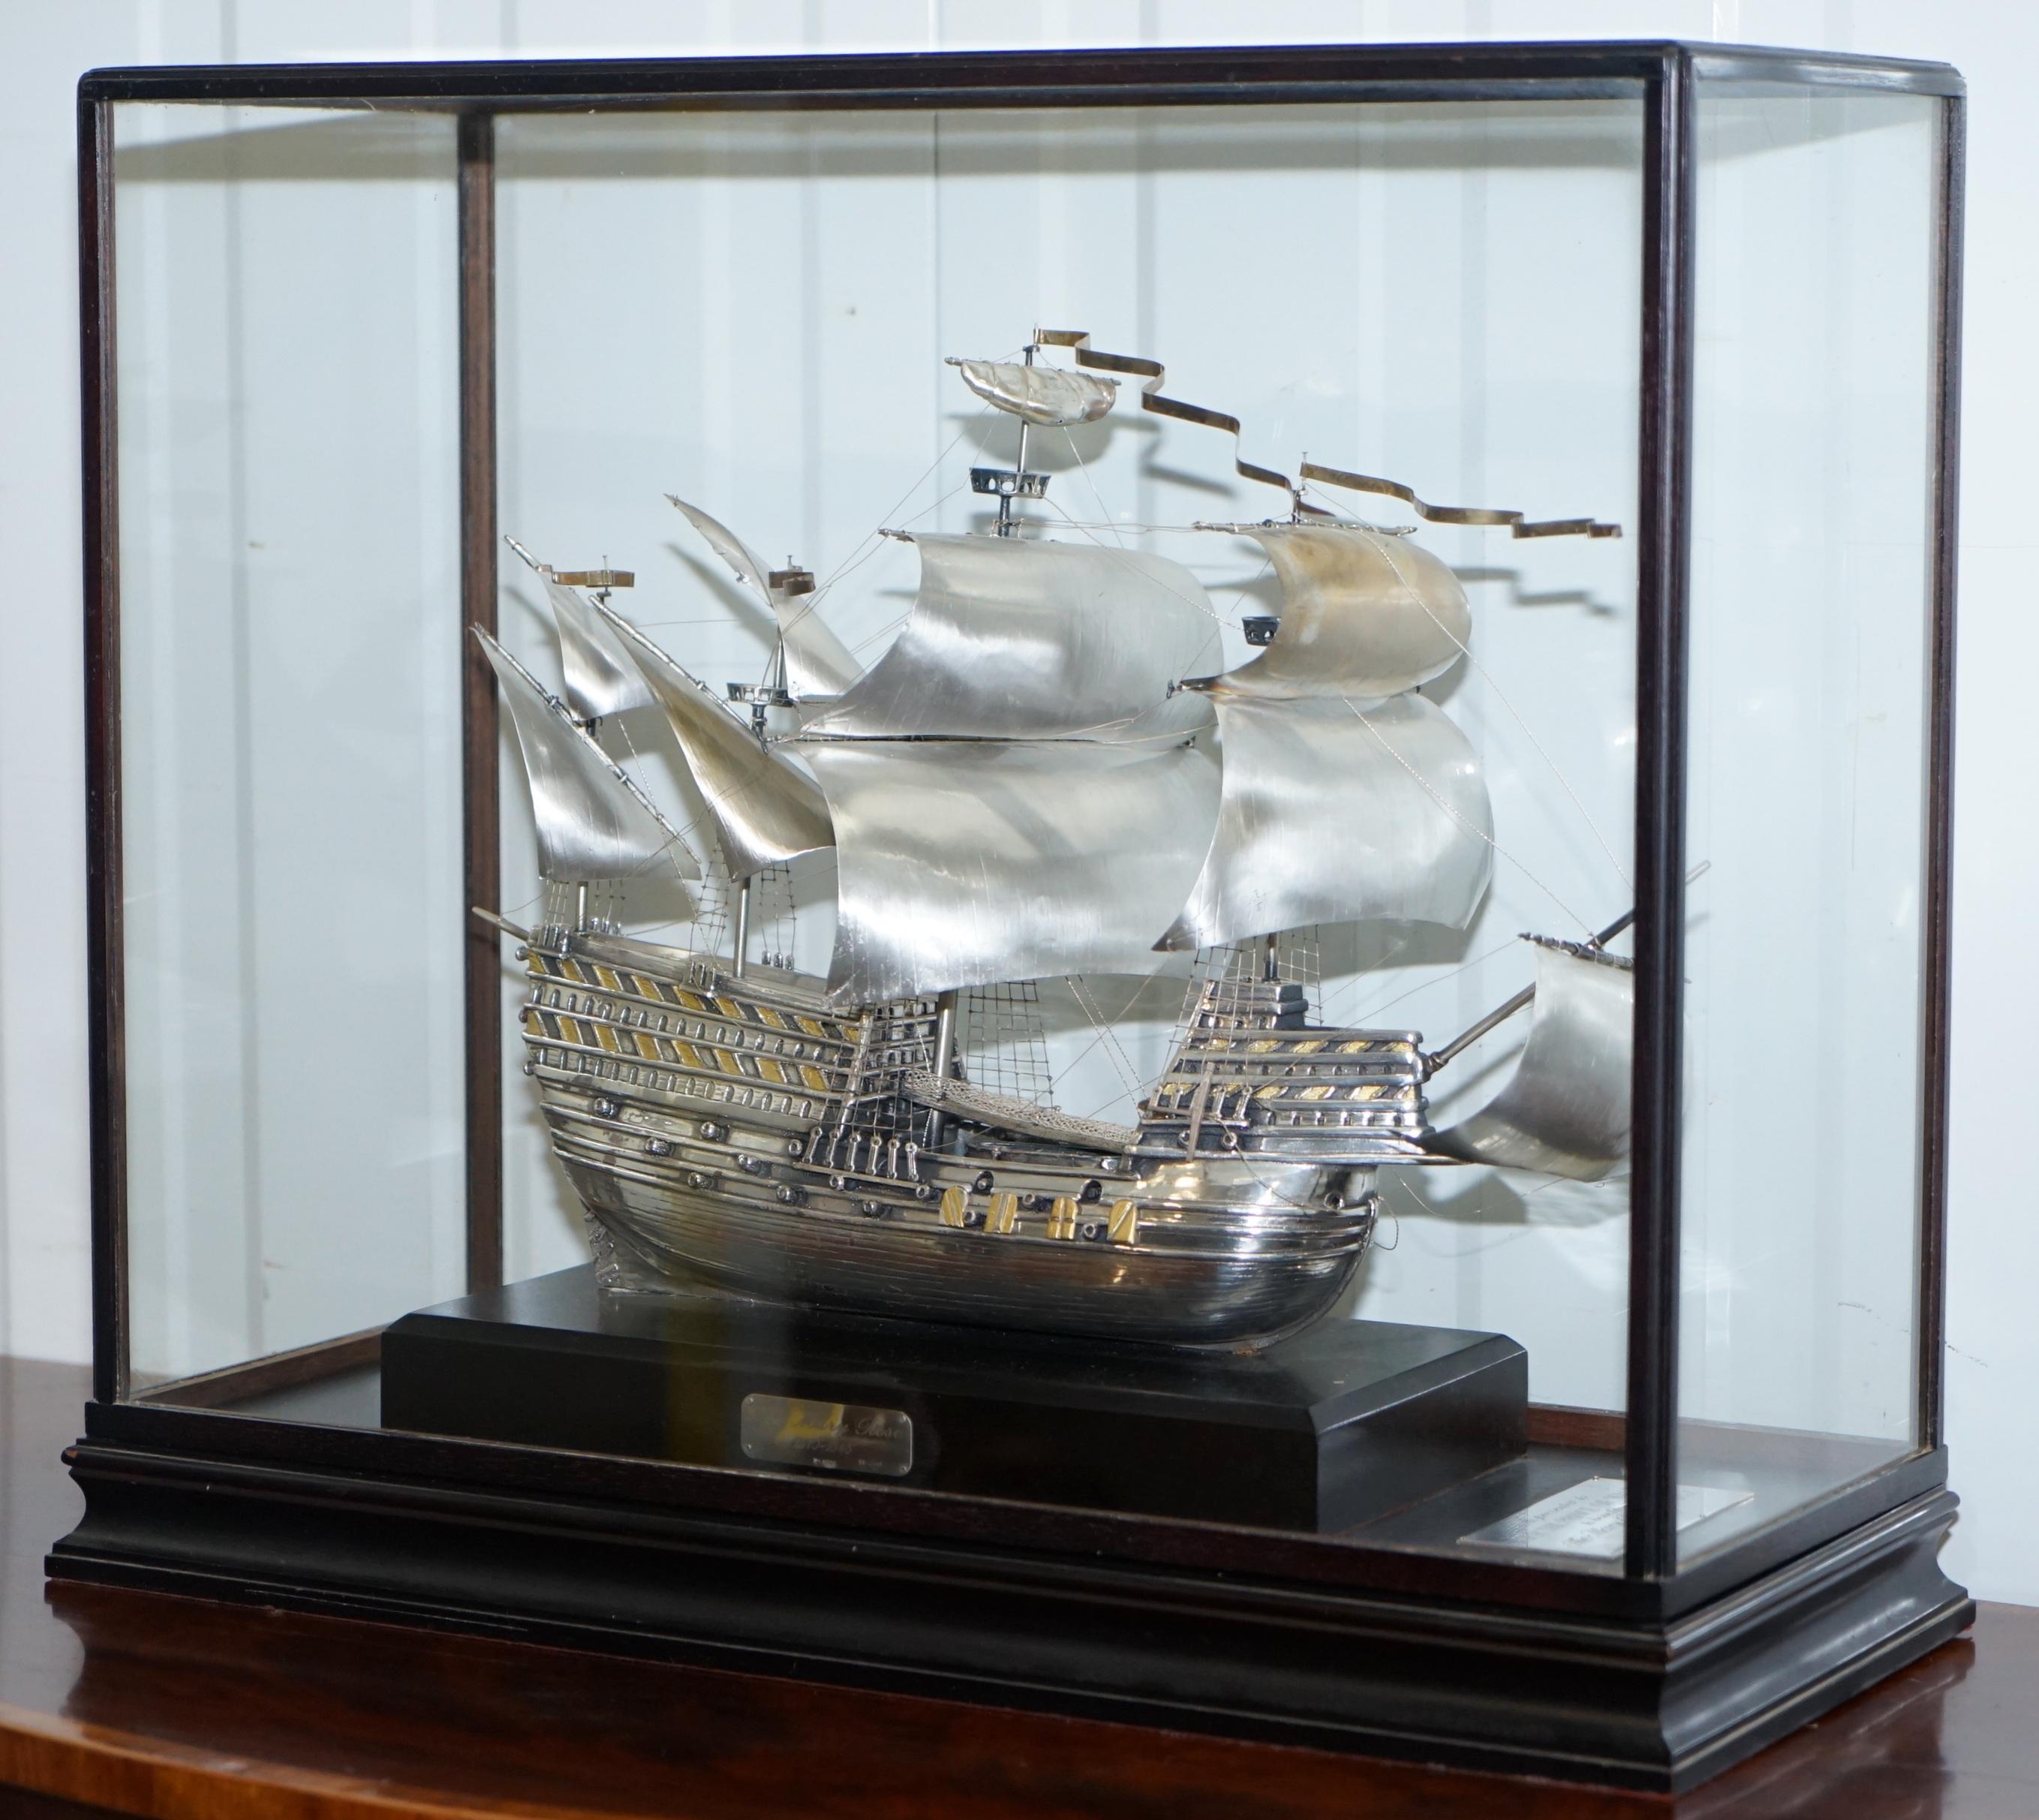 We are delighted to offer for sale this stunning model of King Henry VIII Mary Rose ship with sterling silver plaques one of which states “As Presented to H.R.H The Prince Charles” 

This ship is magnificent and quite large, it is silver plated I